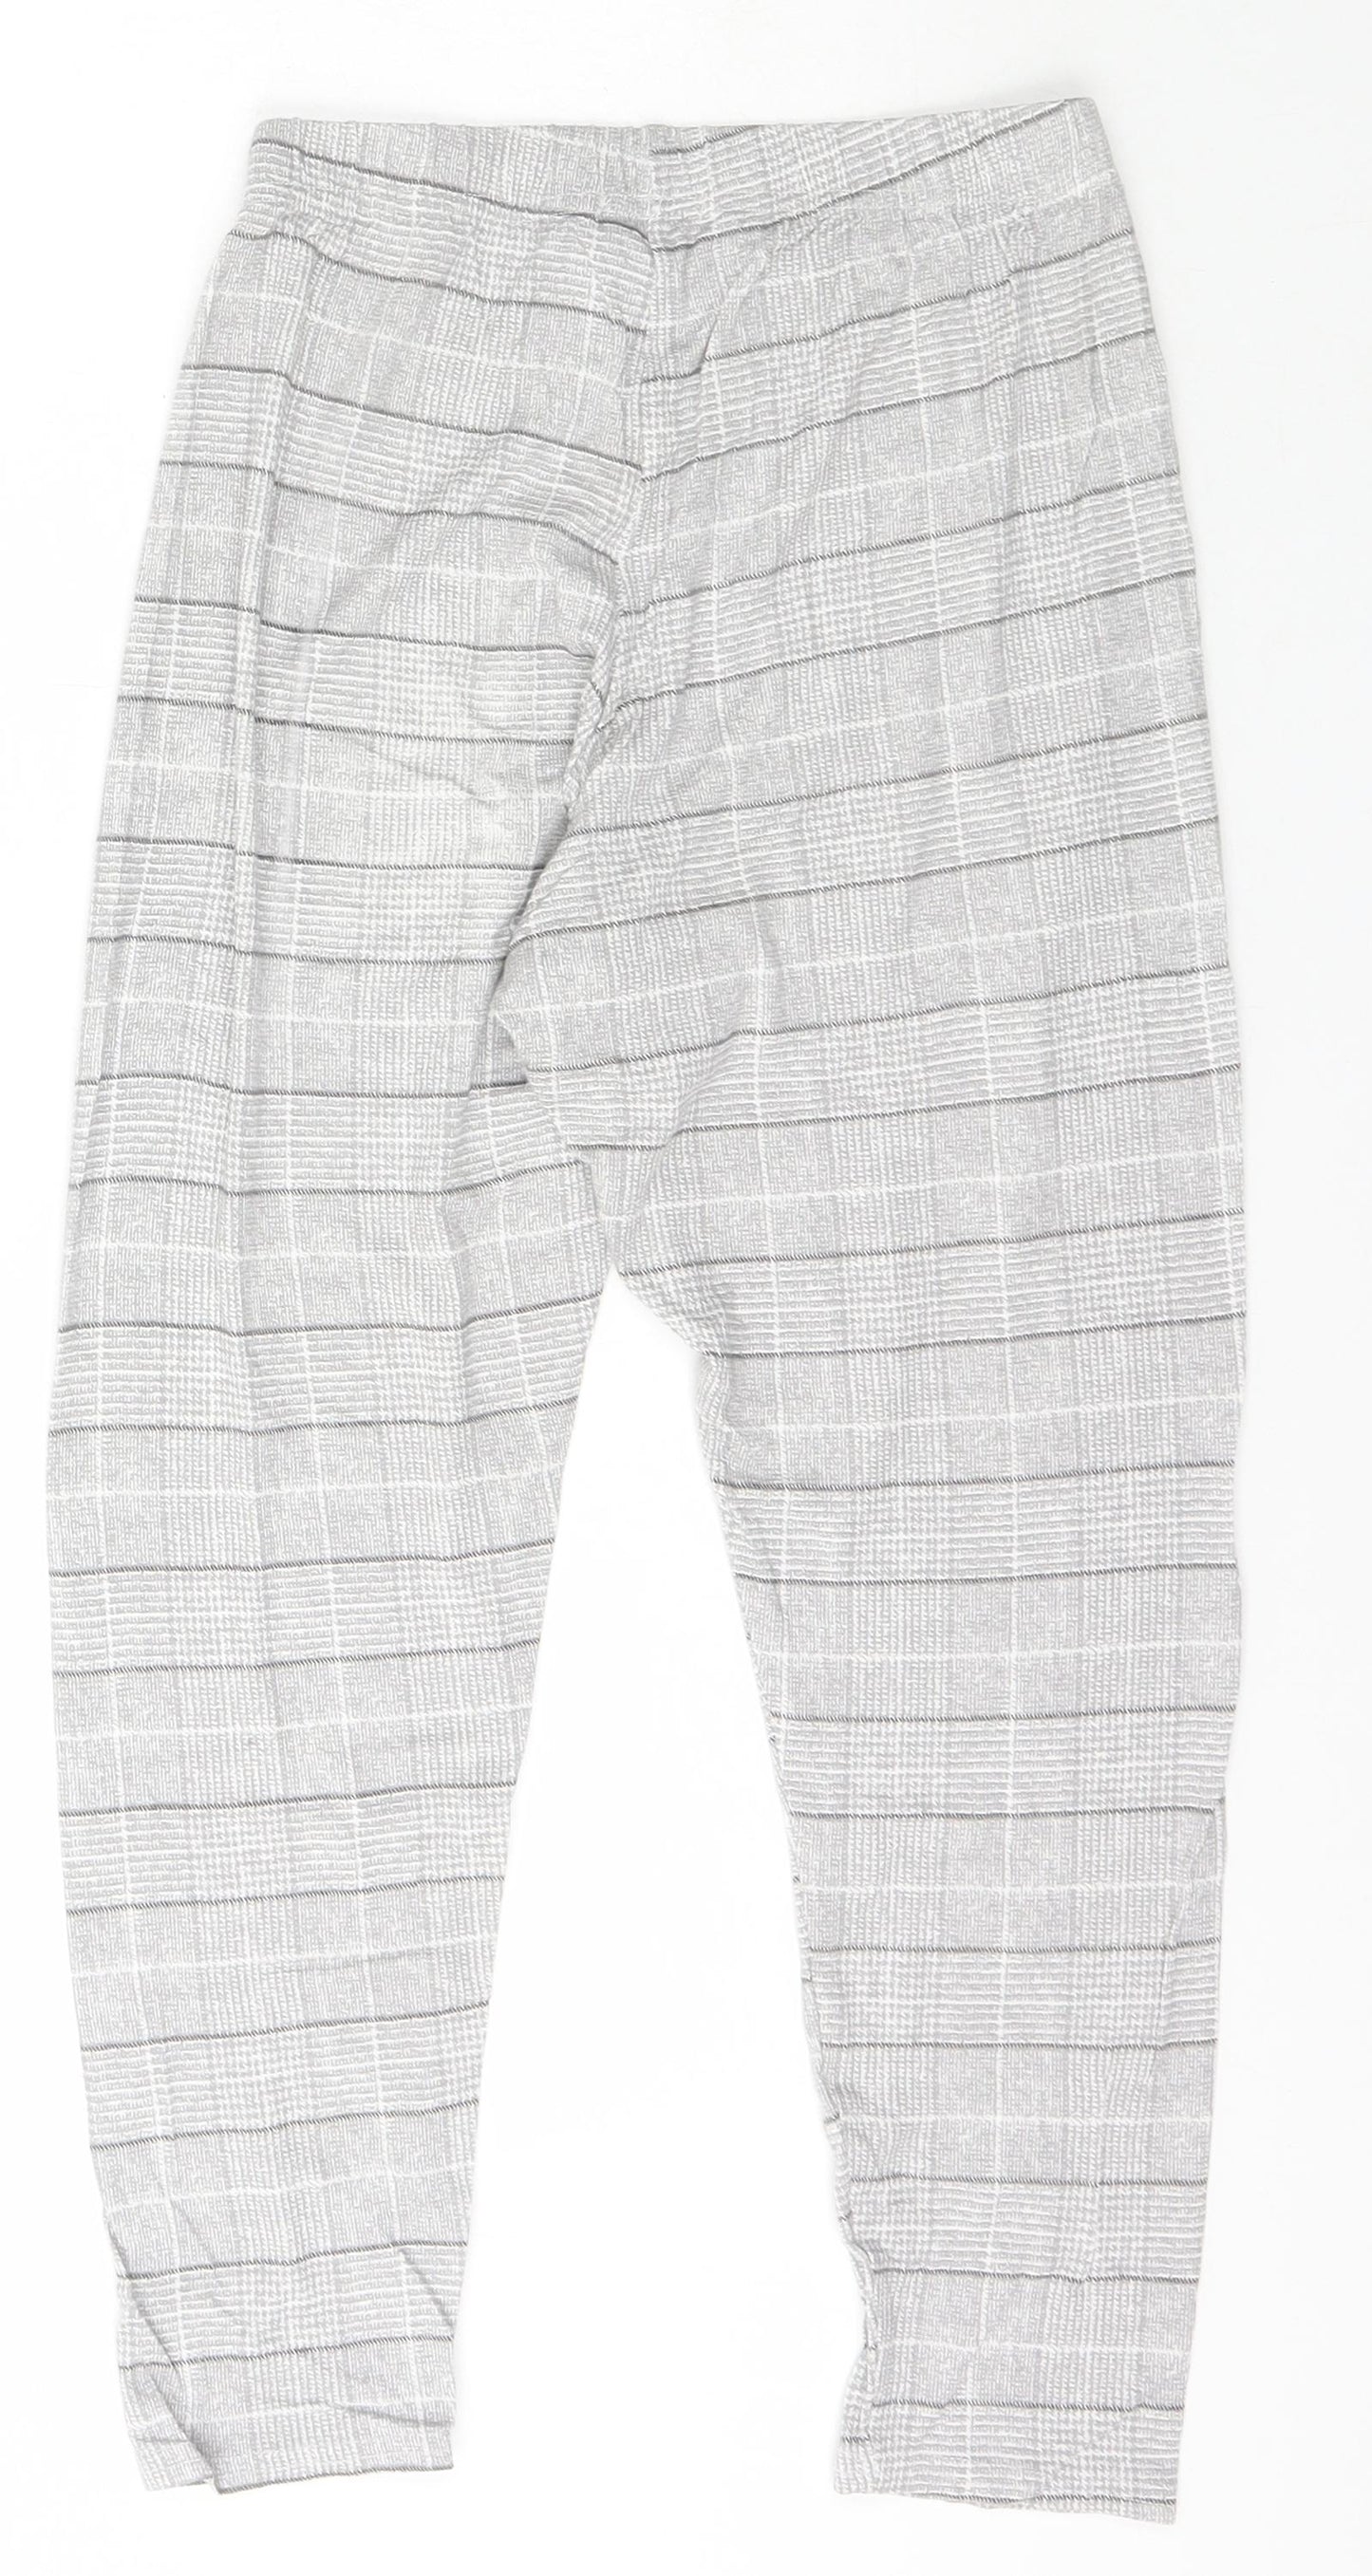 Boohoo Womens Grey Check Viscose Jegging Leggings Size 8 L24 in